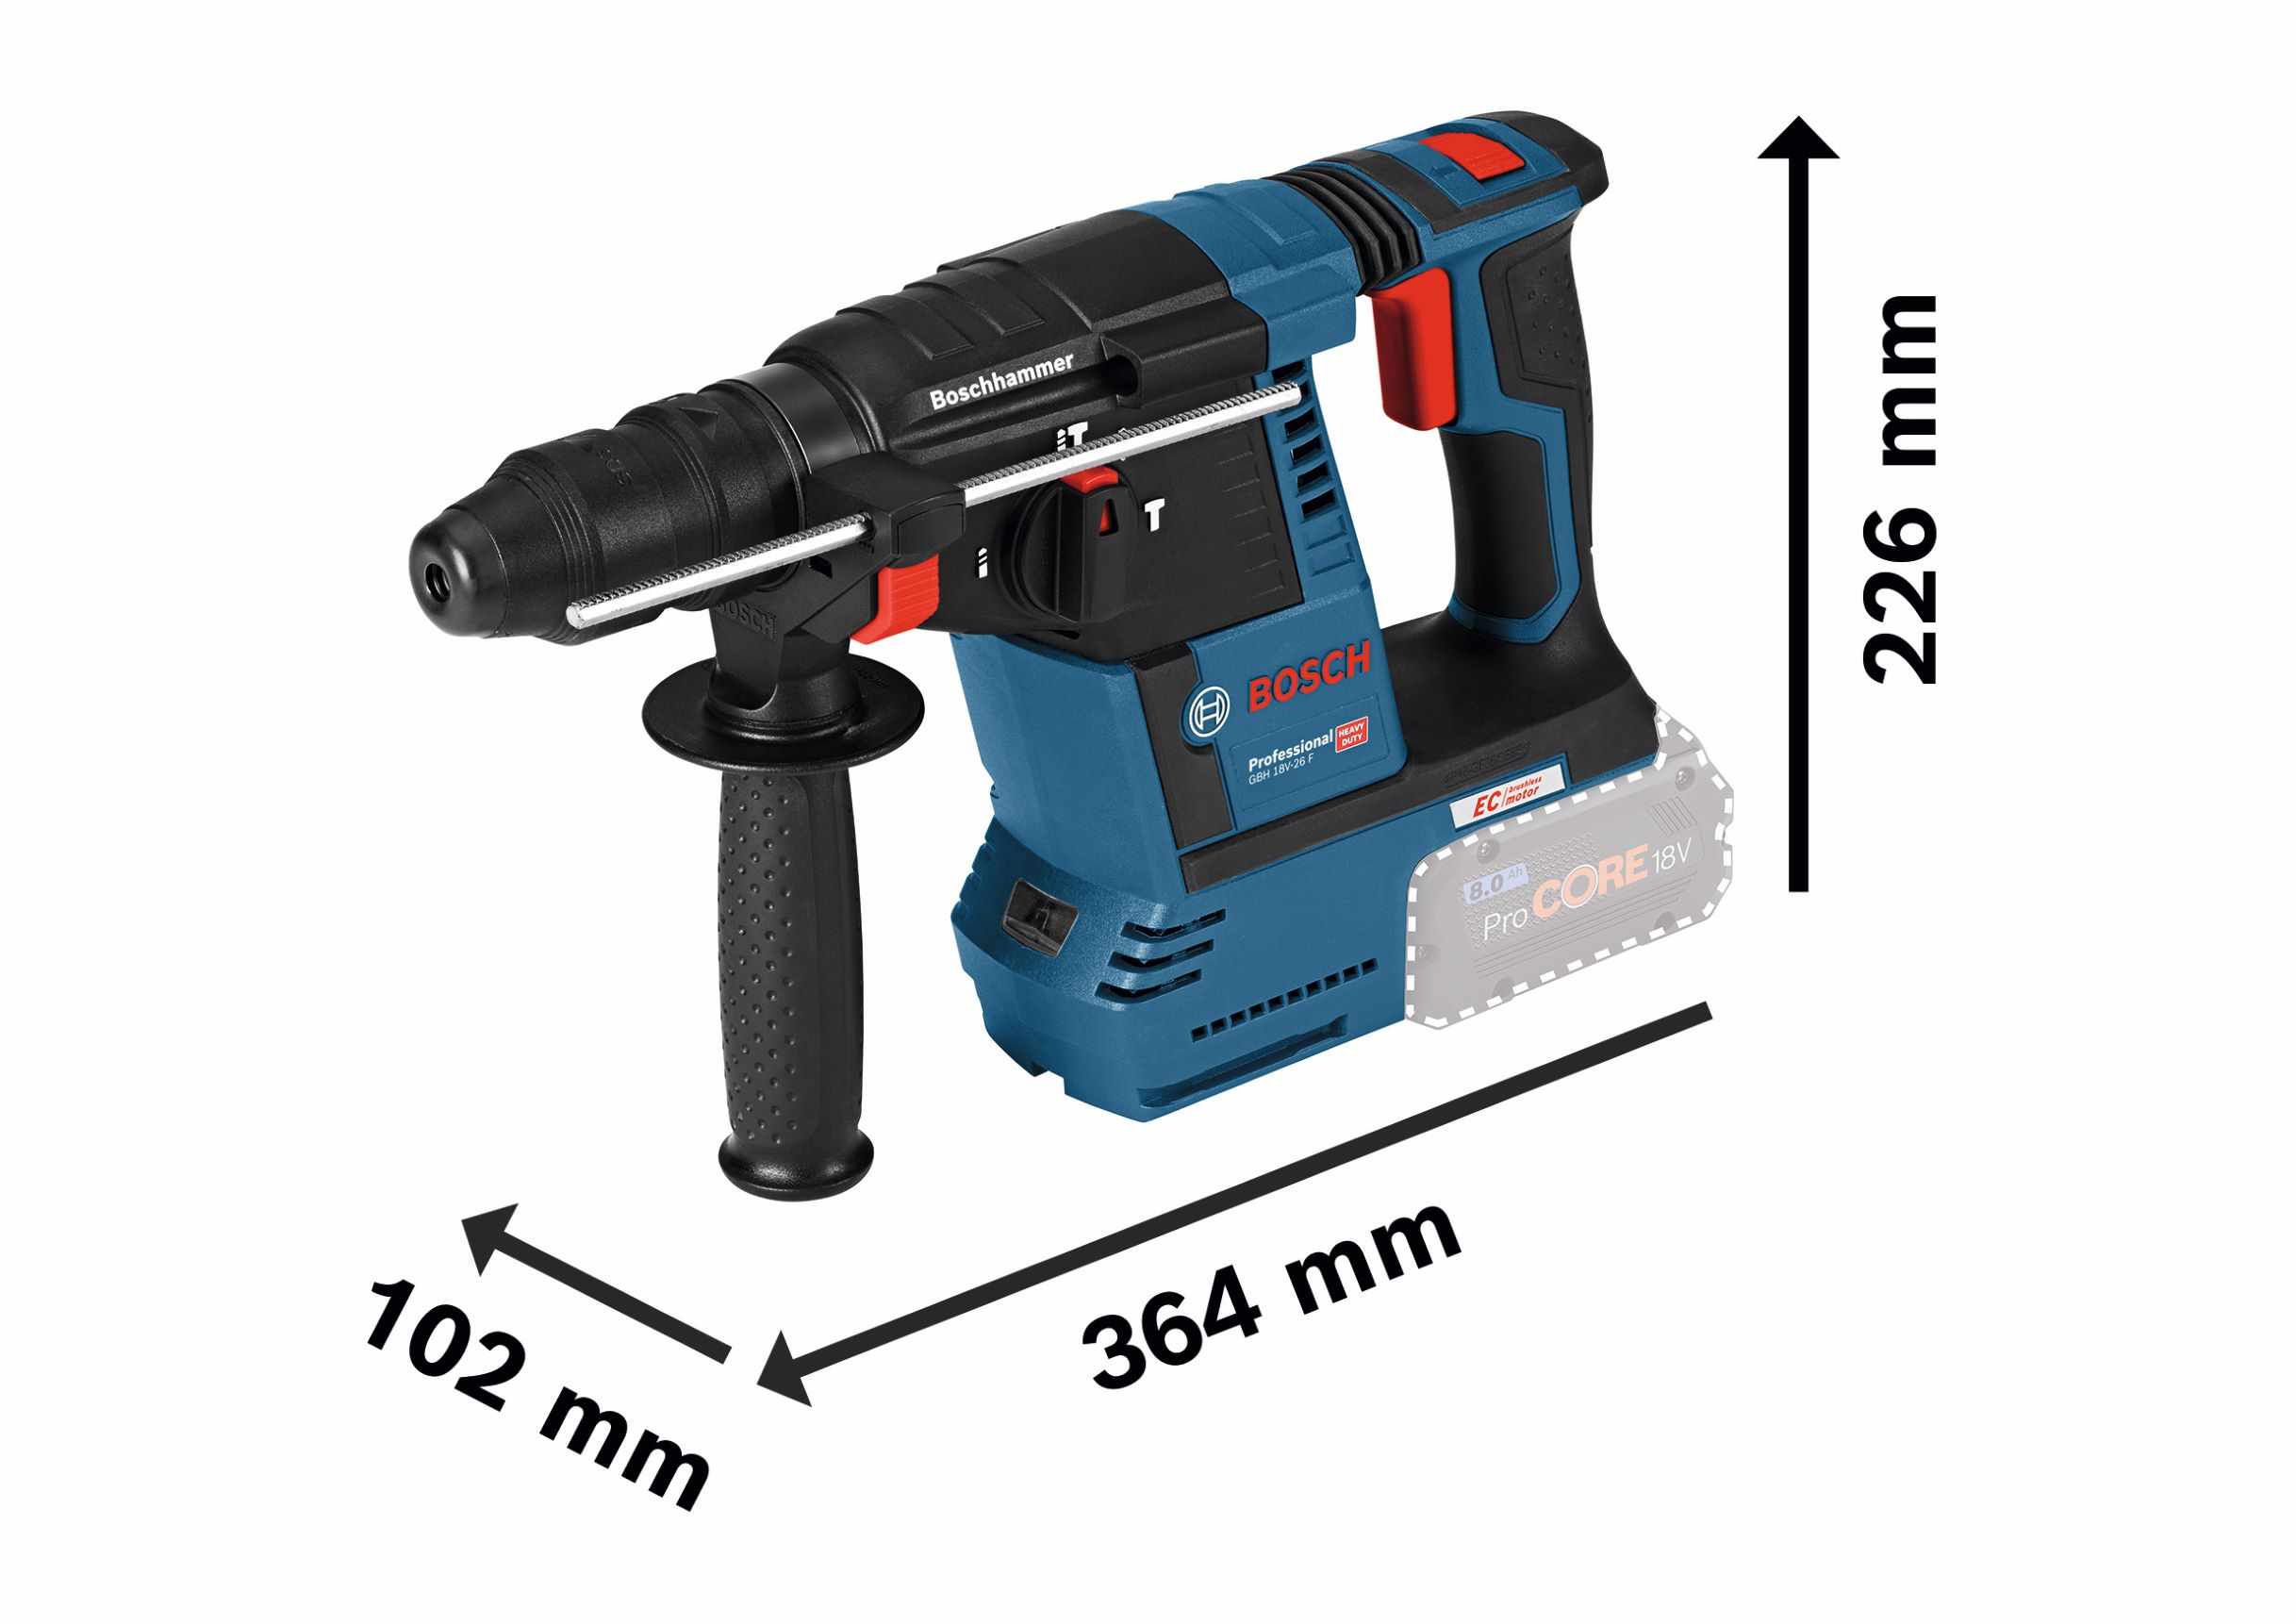 GBH 18V-26 F Professional Cordless Rotary Hammer with SDS Plus Bosch - 3